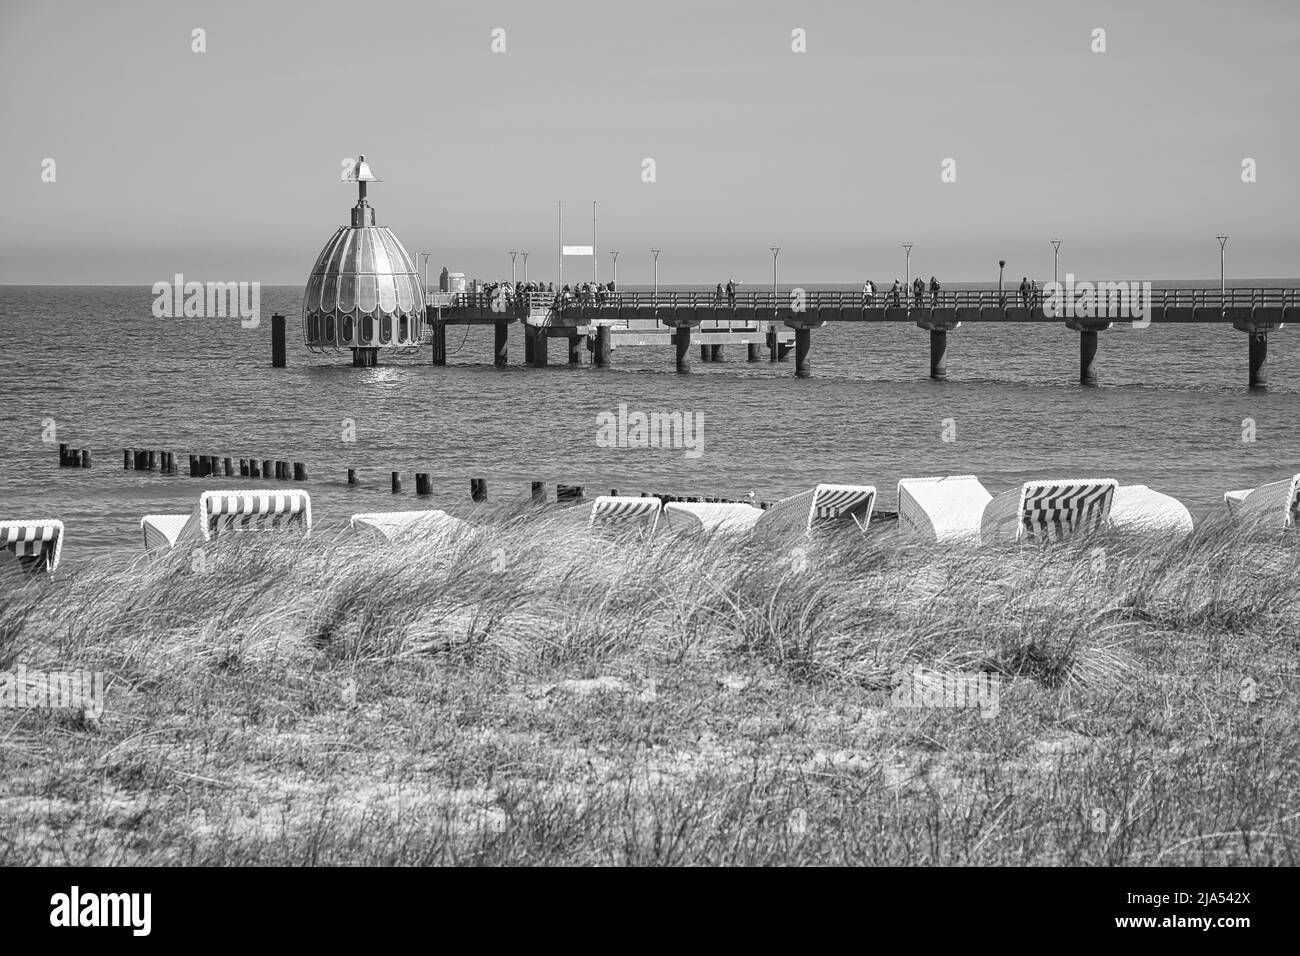 on the coast of the baltic sea on zingst. the pier and the groynes that reach into the water. beautiful light atmosphere in a romantic place Stock Photo